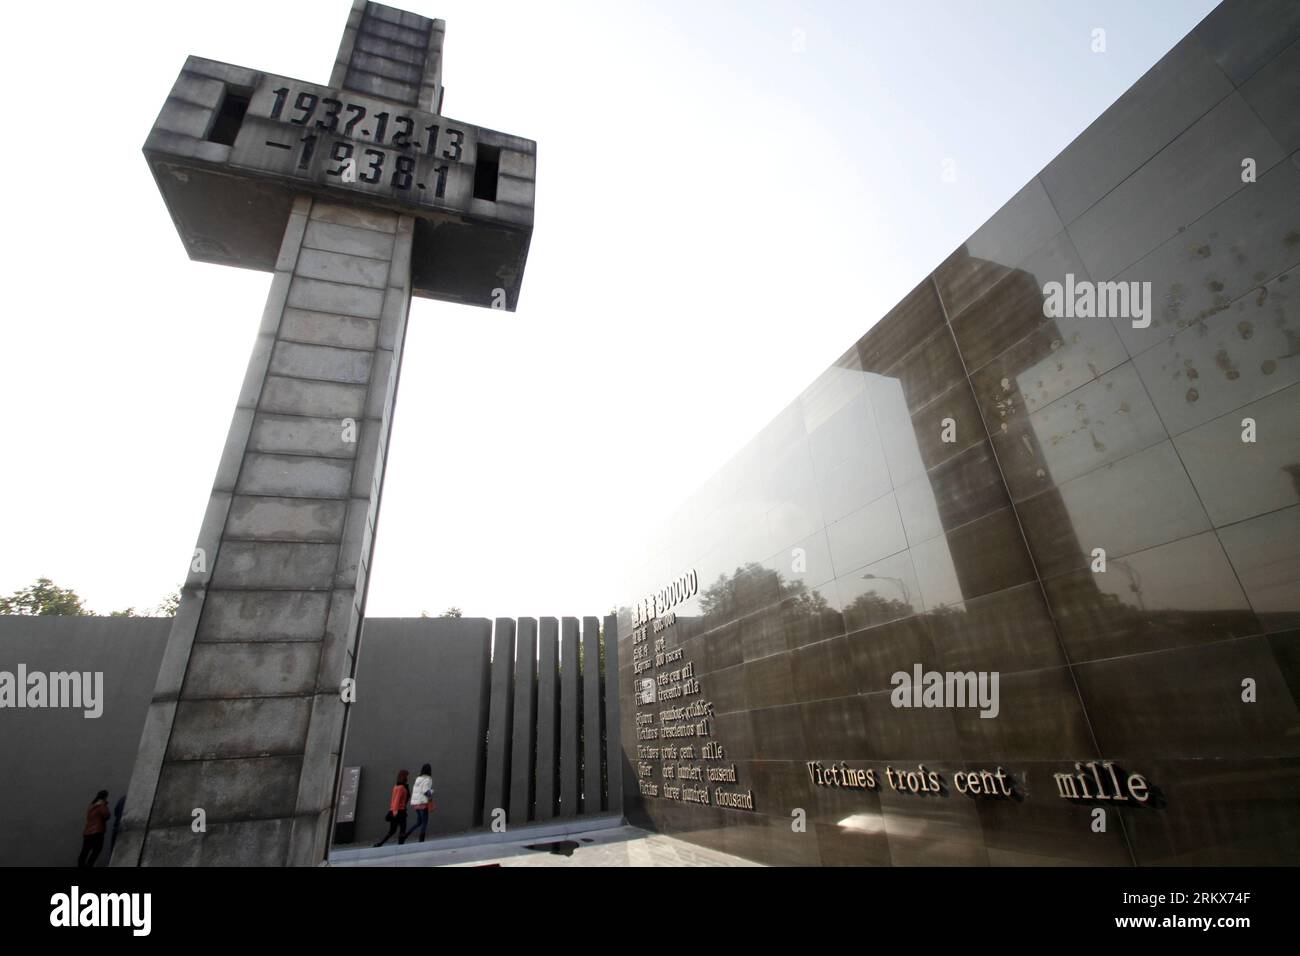 Bildnummer: 58906422  Datum: 11.12.2012  Copyright: imago/Xinhua (121211) -- NANJING, Dec. 11, 2012 (Xinhua) -- visit the Memorial Hall of the Victims in Nanjing Massacre by Japanese Invaders during the World War II in Nanjing, capital of east China s Jiangsu Province, Dec. 11, 2012. A series of memorial activities will be held to commemorate the 75th anniversary of the Nanjing Massacre that left some 300,000 Chinese dead when the Japanese occupied Nanjing on Dec. 13, 1937 and began a six-week massacre. (Xinhua/Dong Jinlin) (mp) CHINA-NANJING-MASSACRE-75TH ANNIVERSARY-MEMORIAL ACTIVITIES (CN) Stock Photo